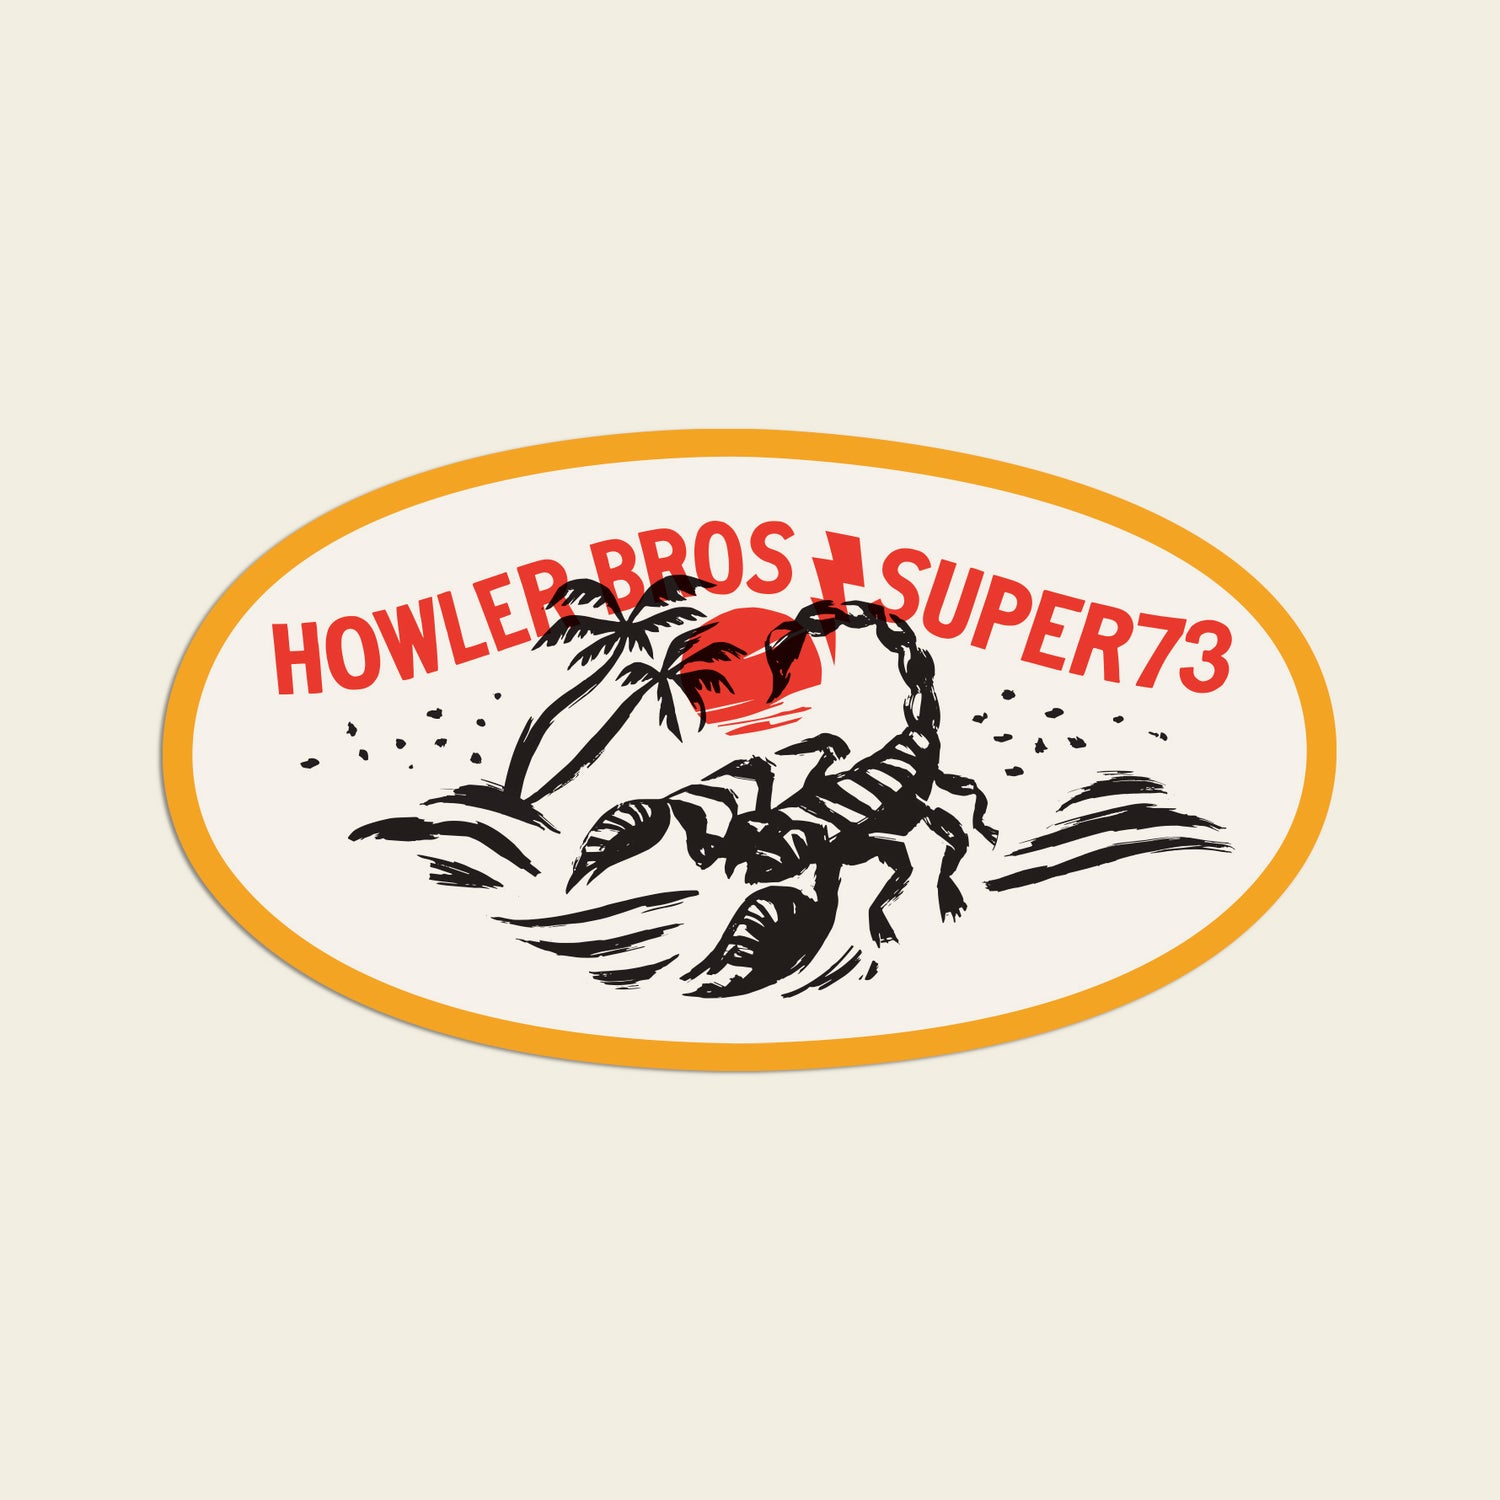 Howler Brothers x Super73 Sticker